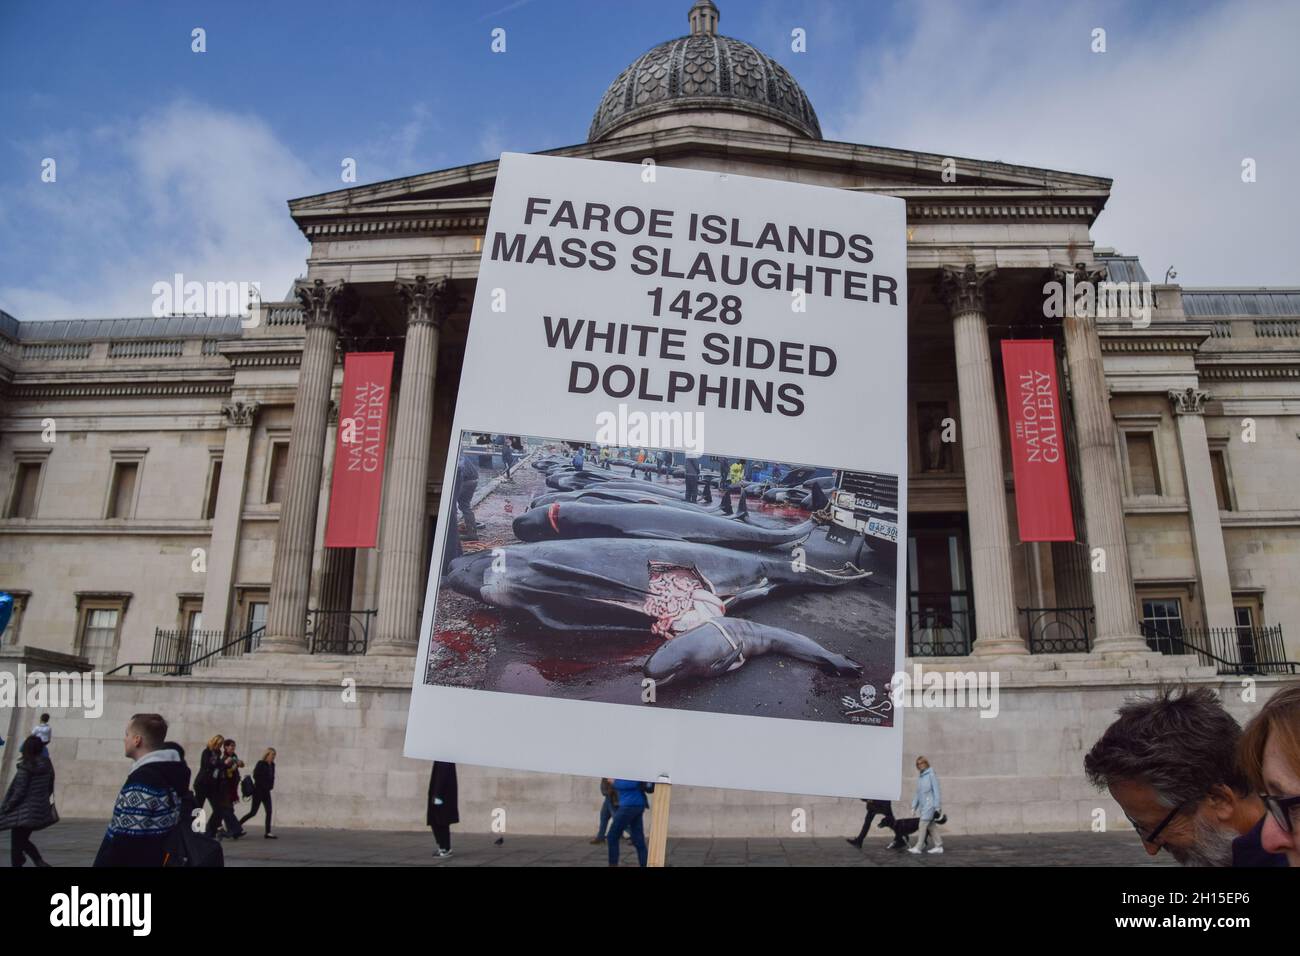 London, UK. 16th Oct, 2021. A protester holds a placard with a graphic image of dolphin killing in Faroe Islands during the demonstration in Trafalgar Square.Members of marine conservation organization Sea Shepherd and other activists marched through Westminster, calling for an end to the slaughter of dolphins in Faroe Islands and Taiji, Japan. Credit: SOPA Images Limited/Alamy Live News Stock Photo